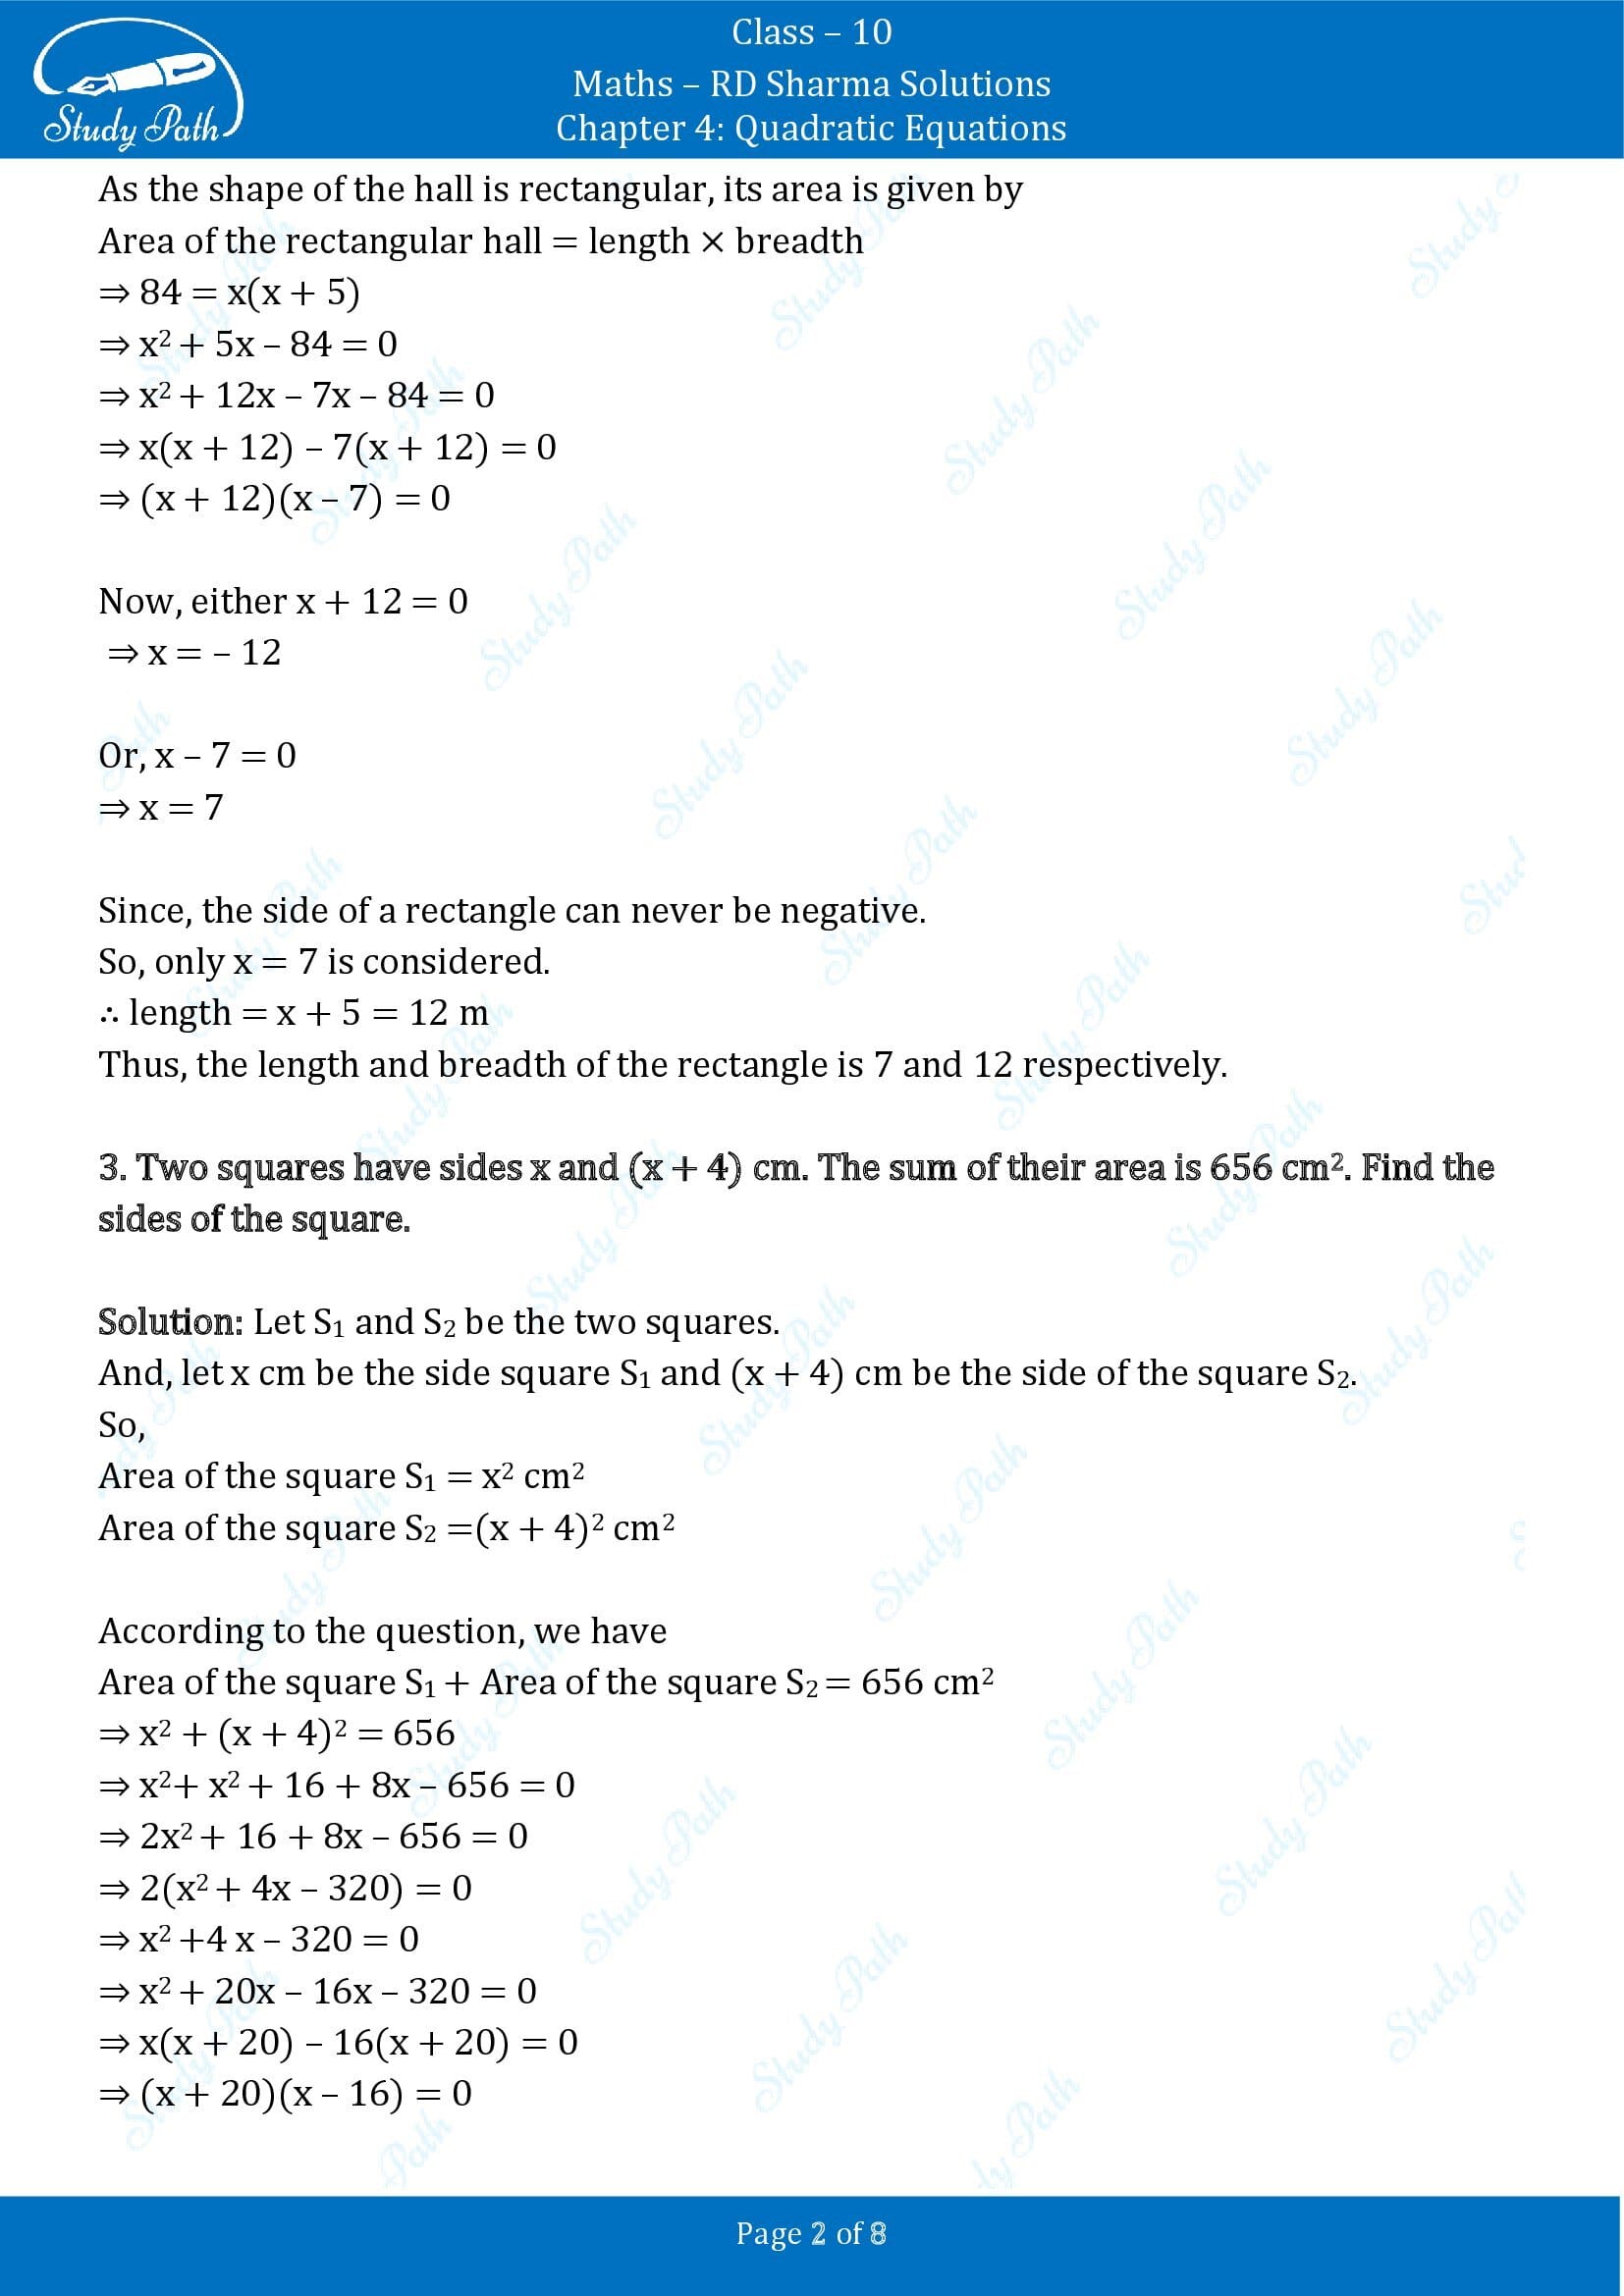 RD Sharma Solutions Class 10 Chapter 4 Quadratic Equations Exercise 4.11 00002